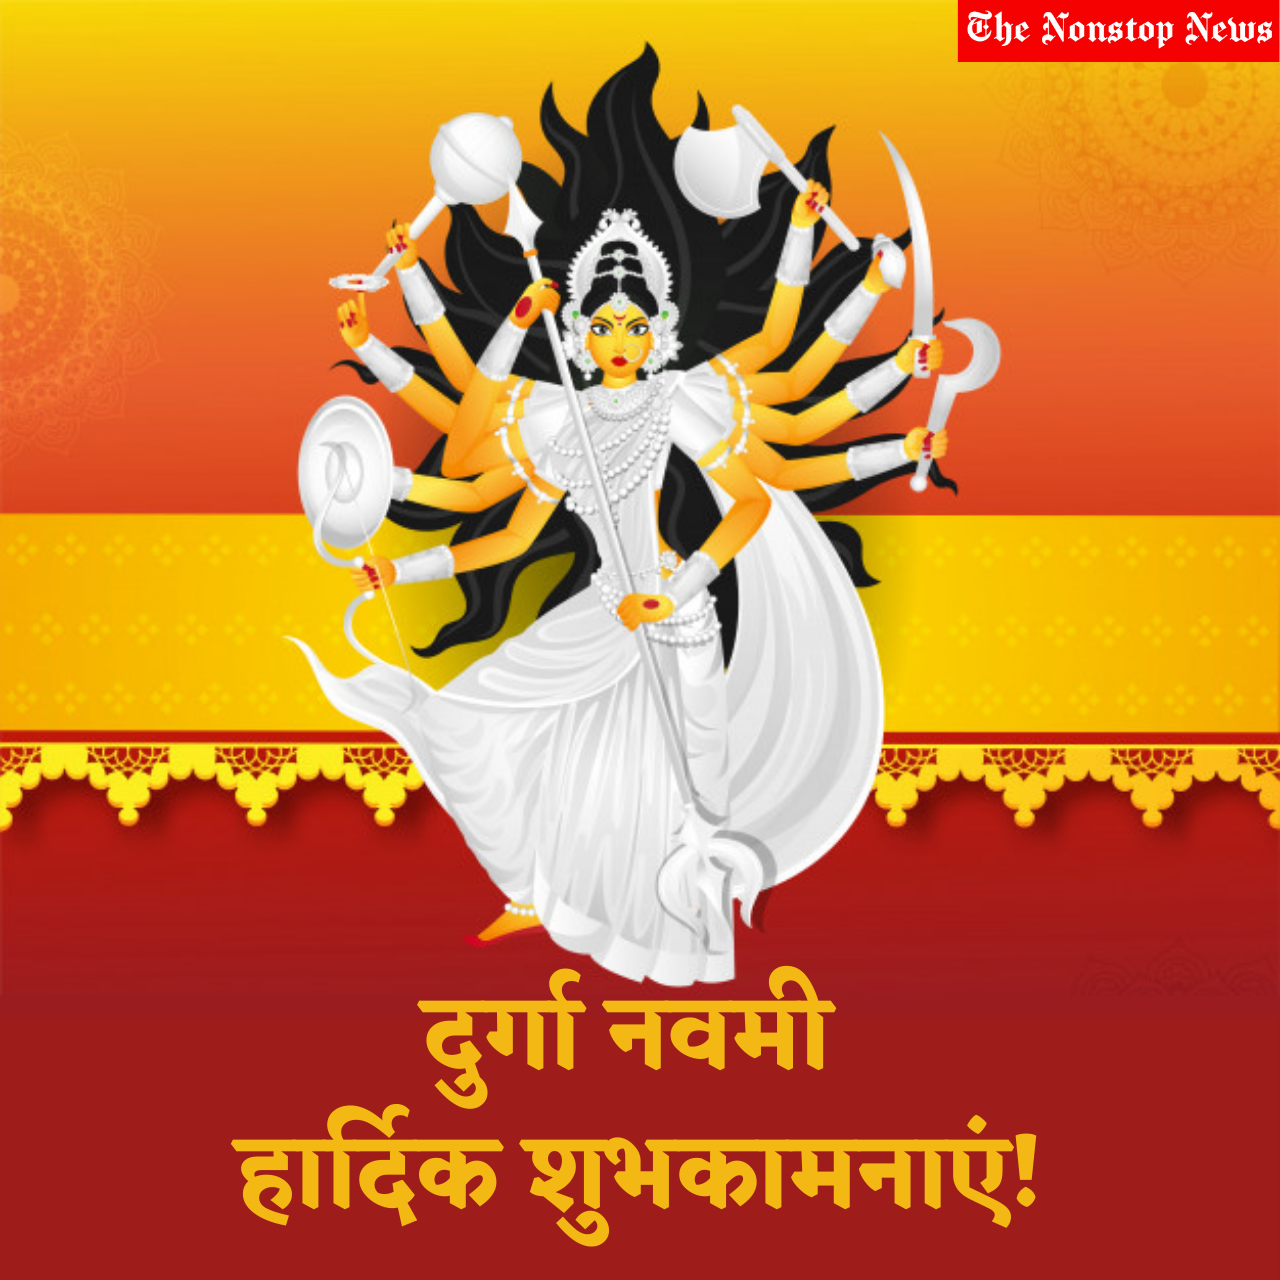 Happy Durga Navami 2021 Wishes in Hindi, Messages, Greetings, Quotes, and Images to share on Maha Navami